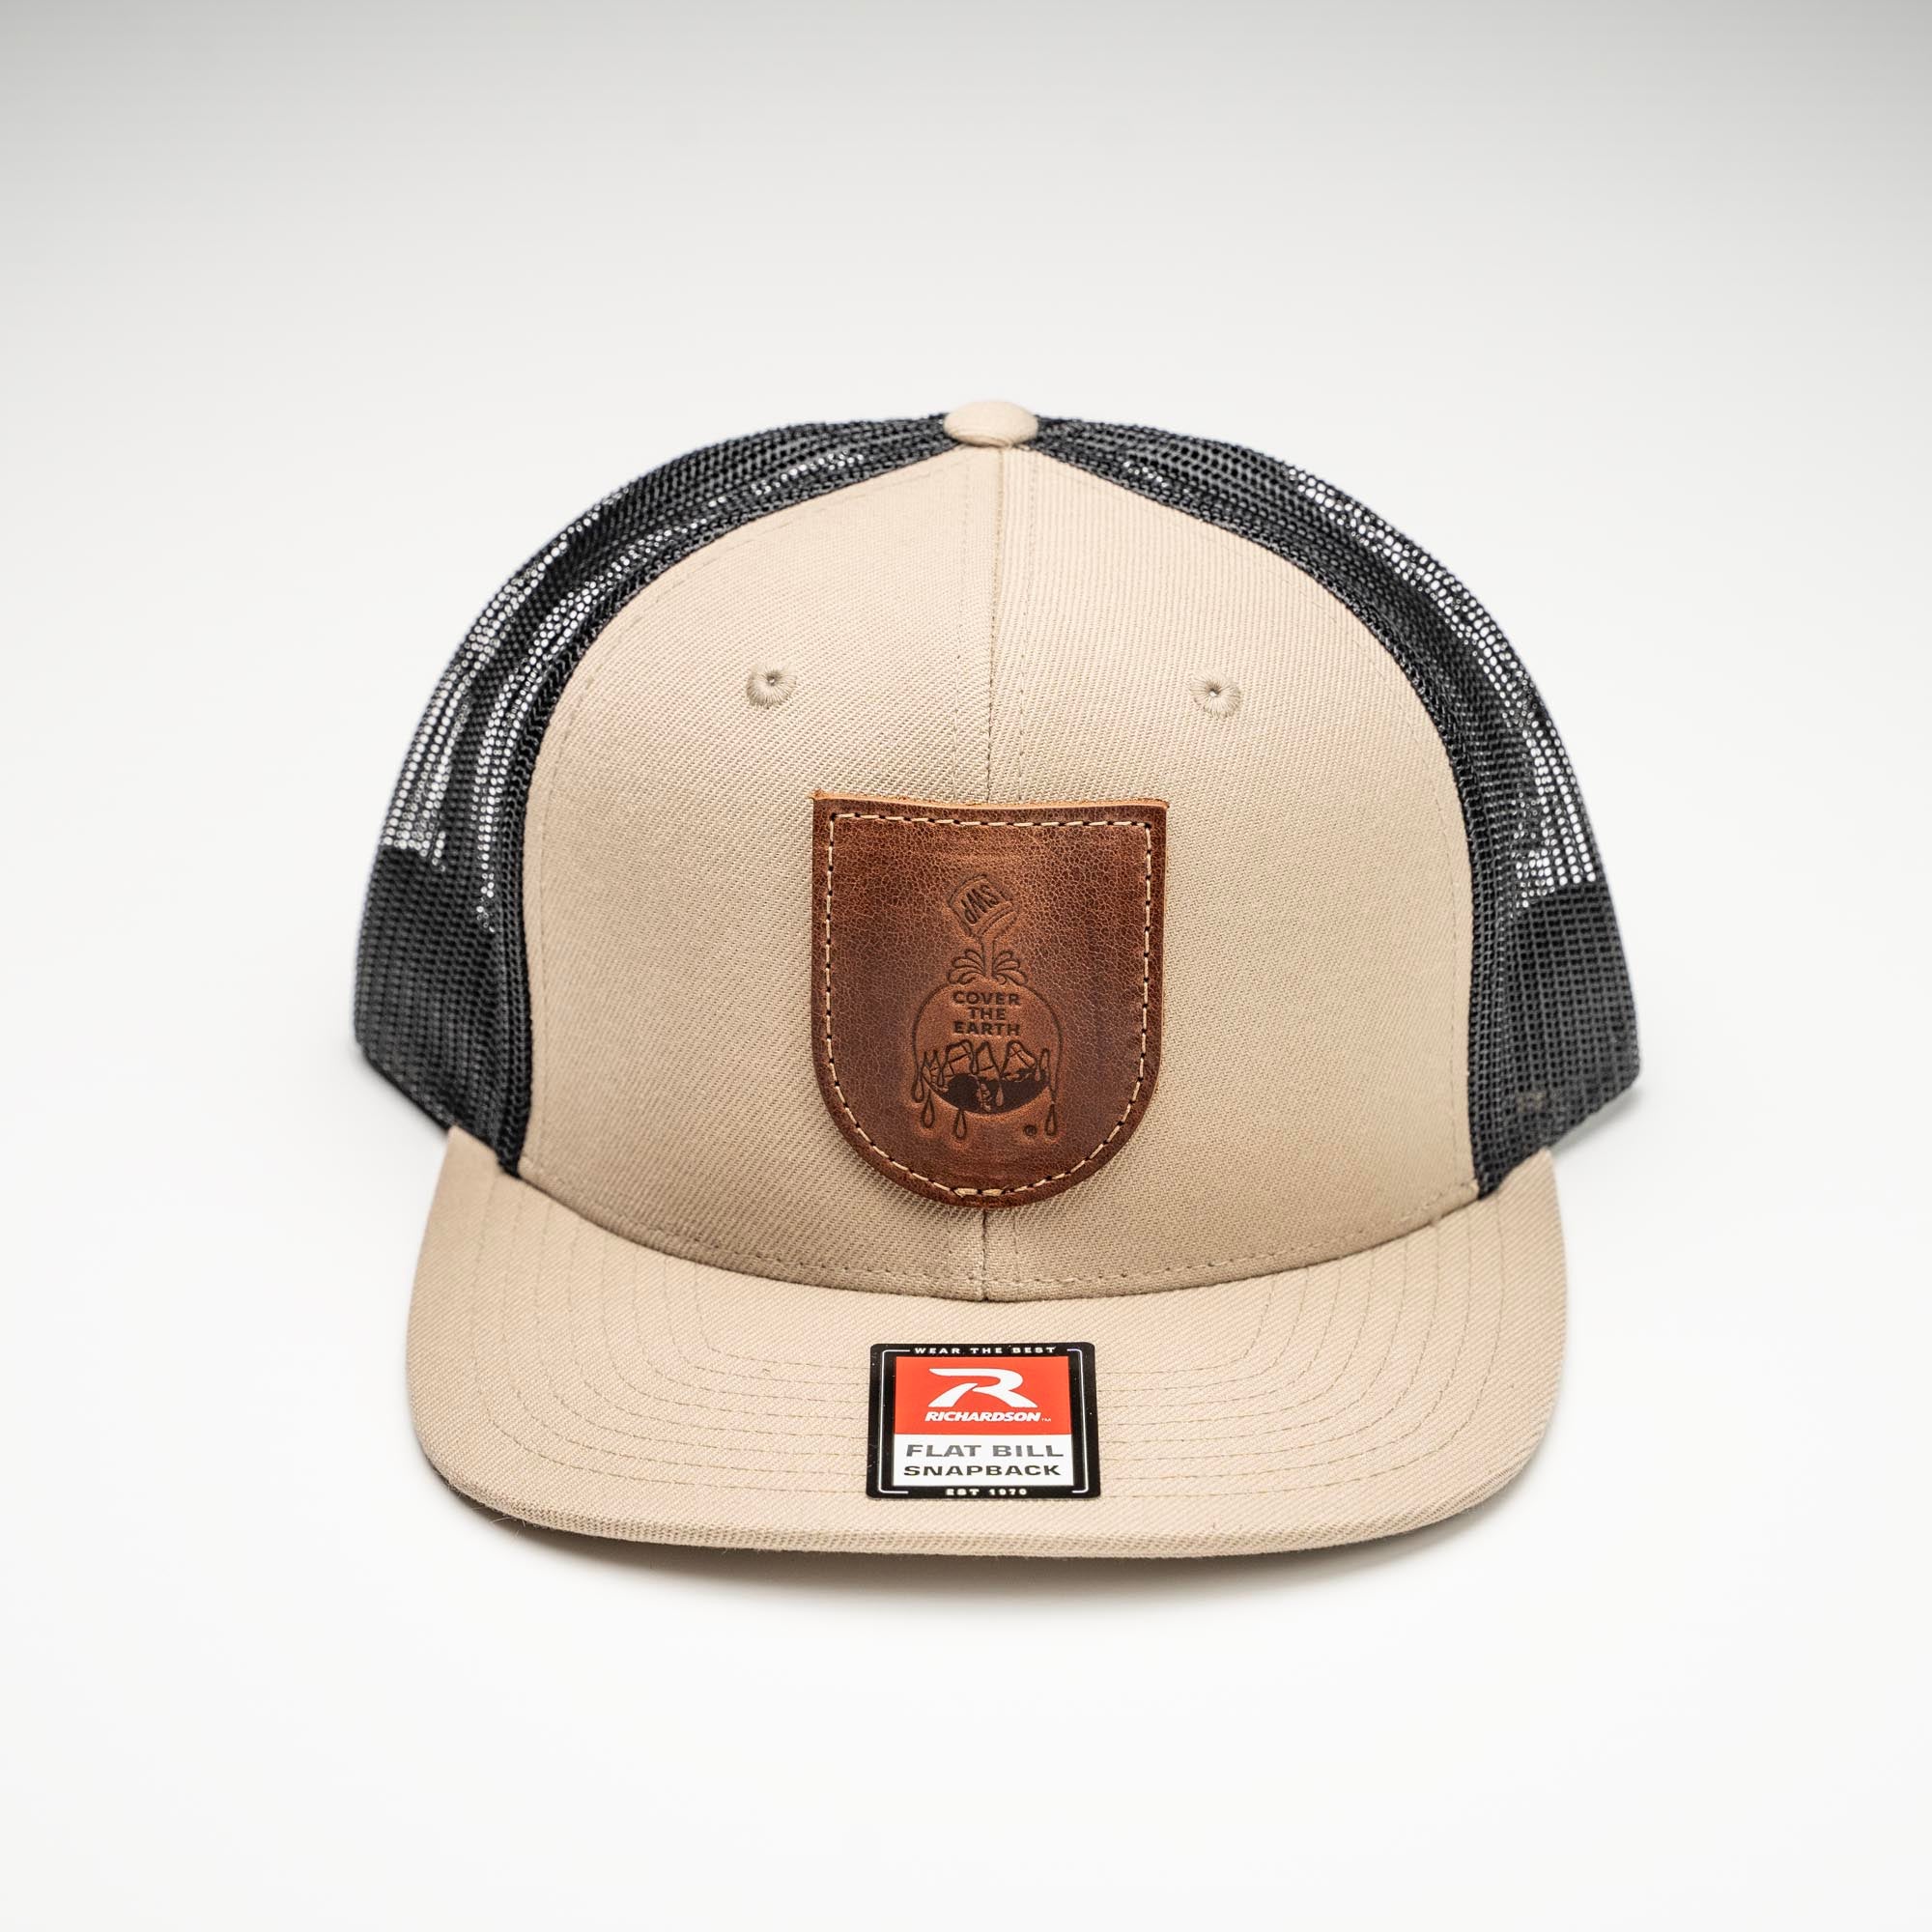 Debossed Heat Pressed - Richardson 511 Cap Leather Patch Flat Bill Trucker Hat with YOUR LOGO